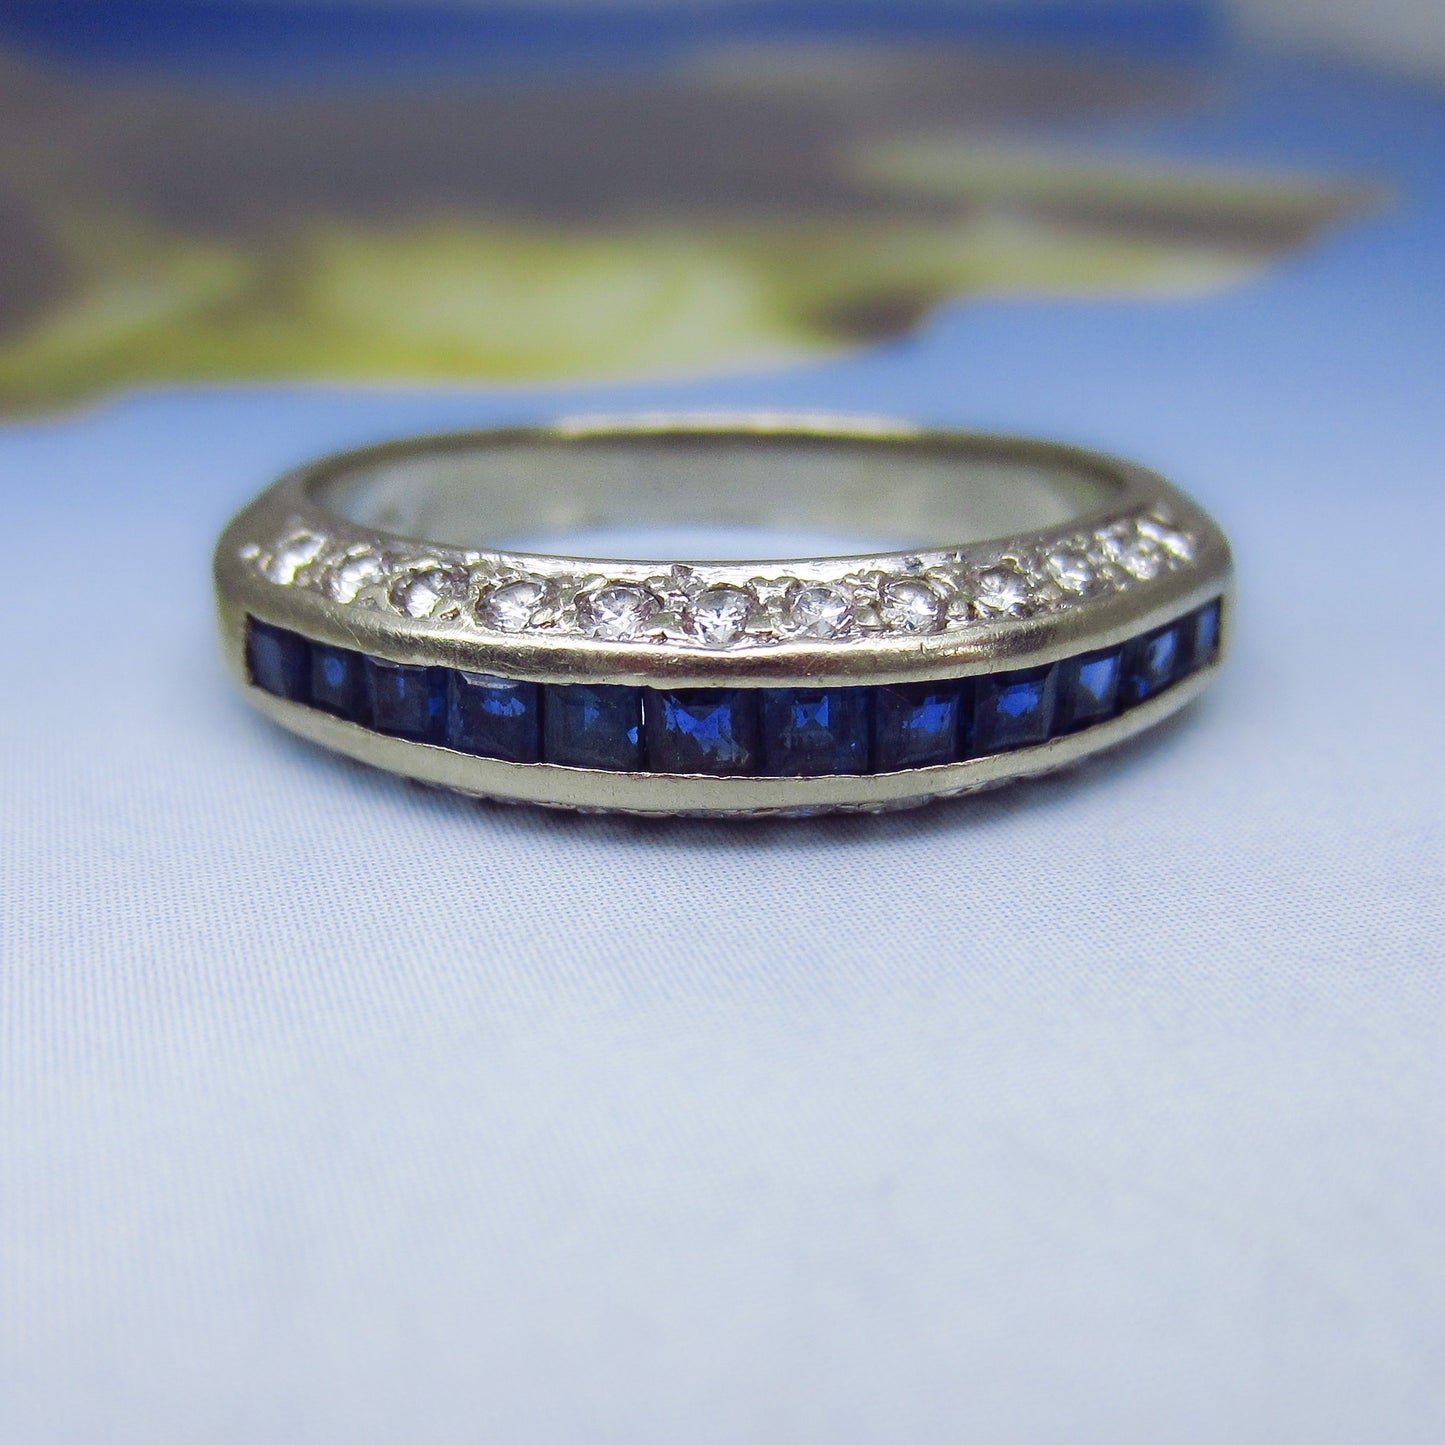 SOLD—Late Art Deco Sapphire and Diamond Band 14k c. 1940